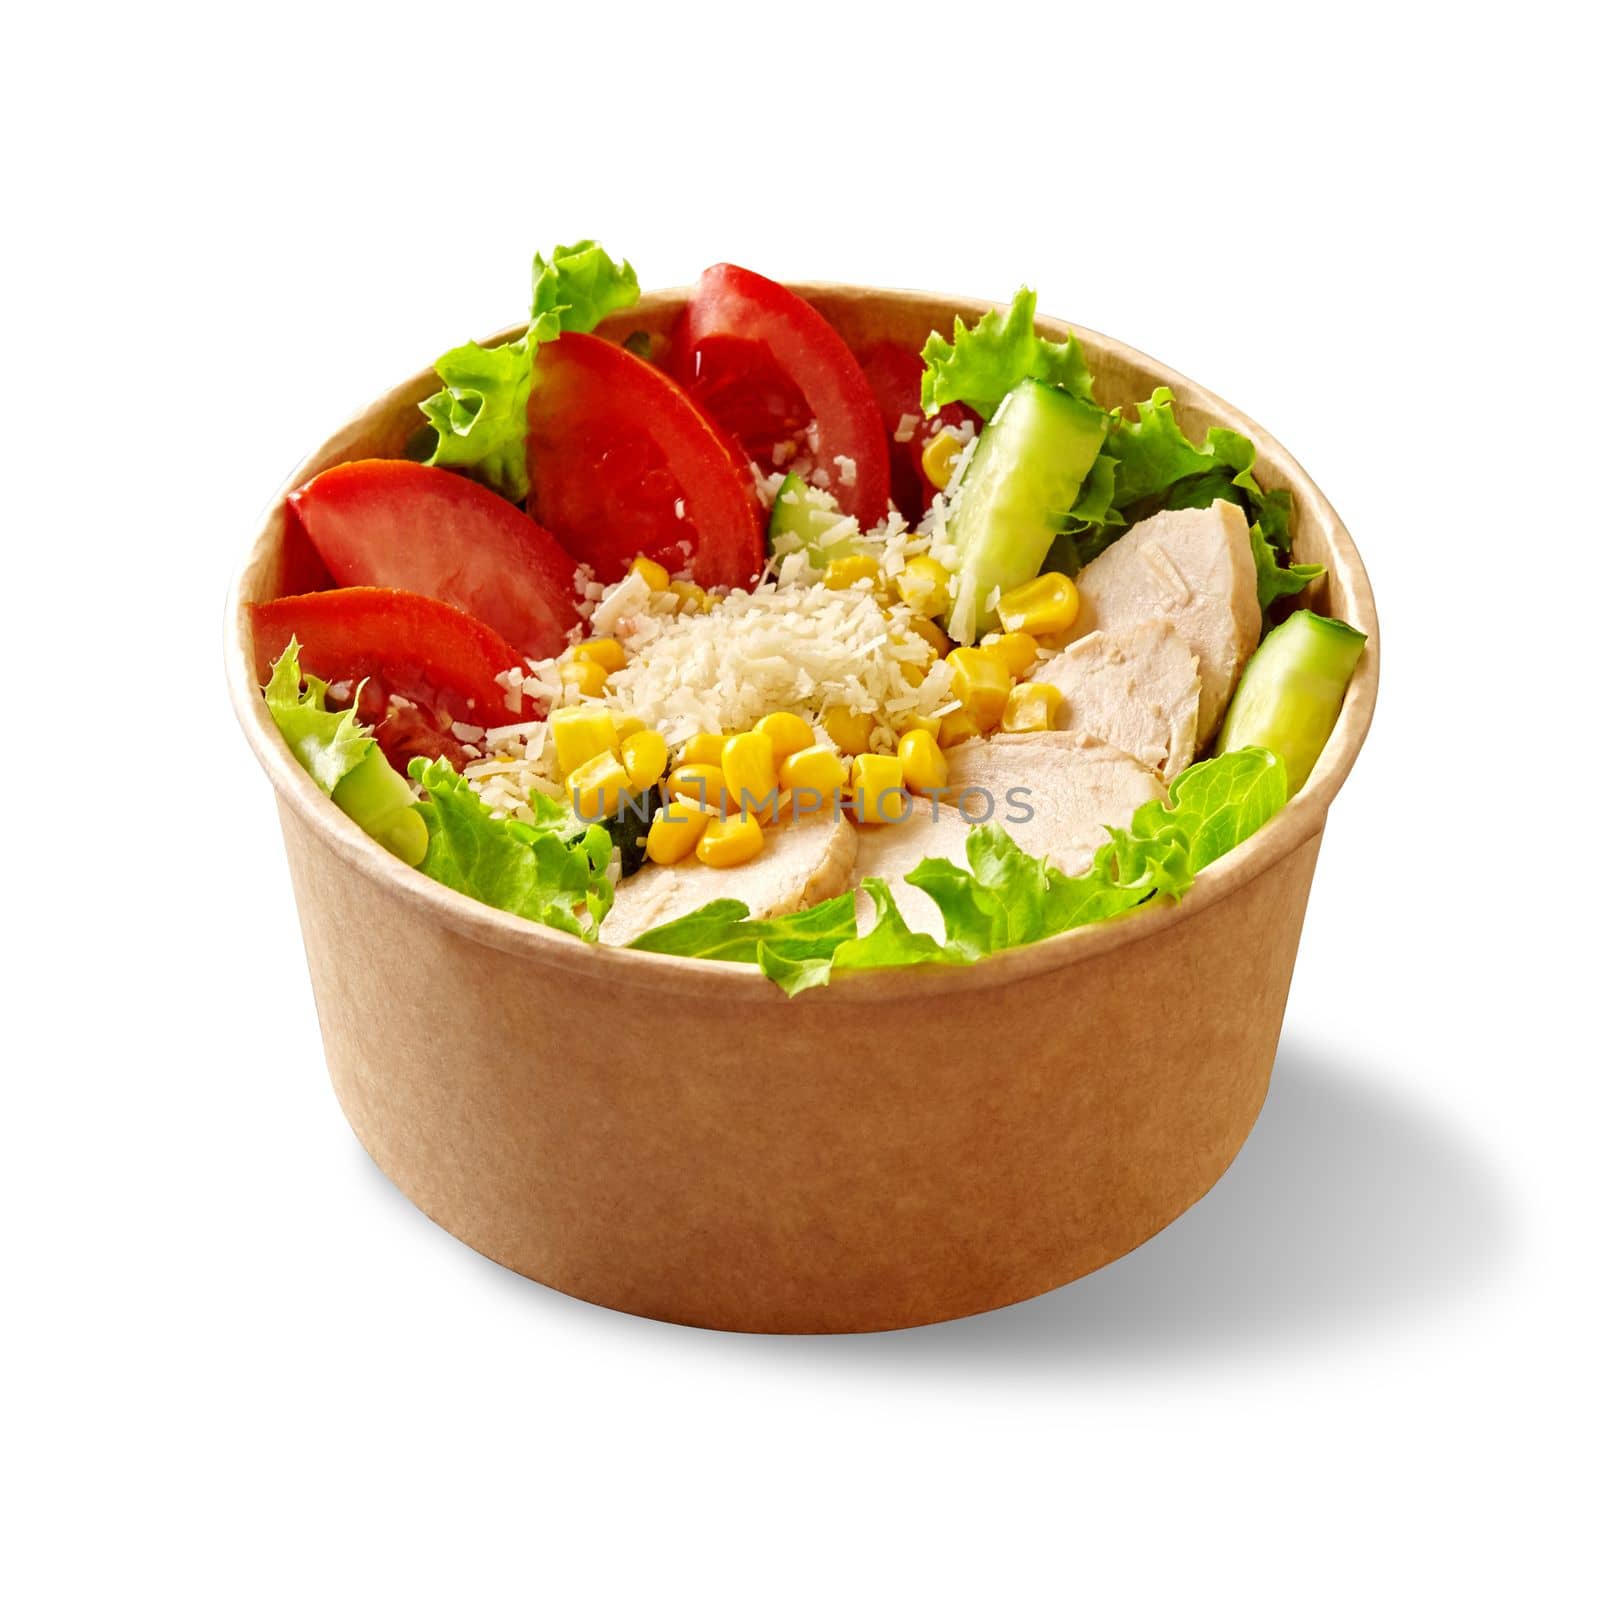 Salad of lettuce, tomato, cucumber, chicken, corn and grated parmesan in cardboard cup on white by nazarovsergey